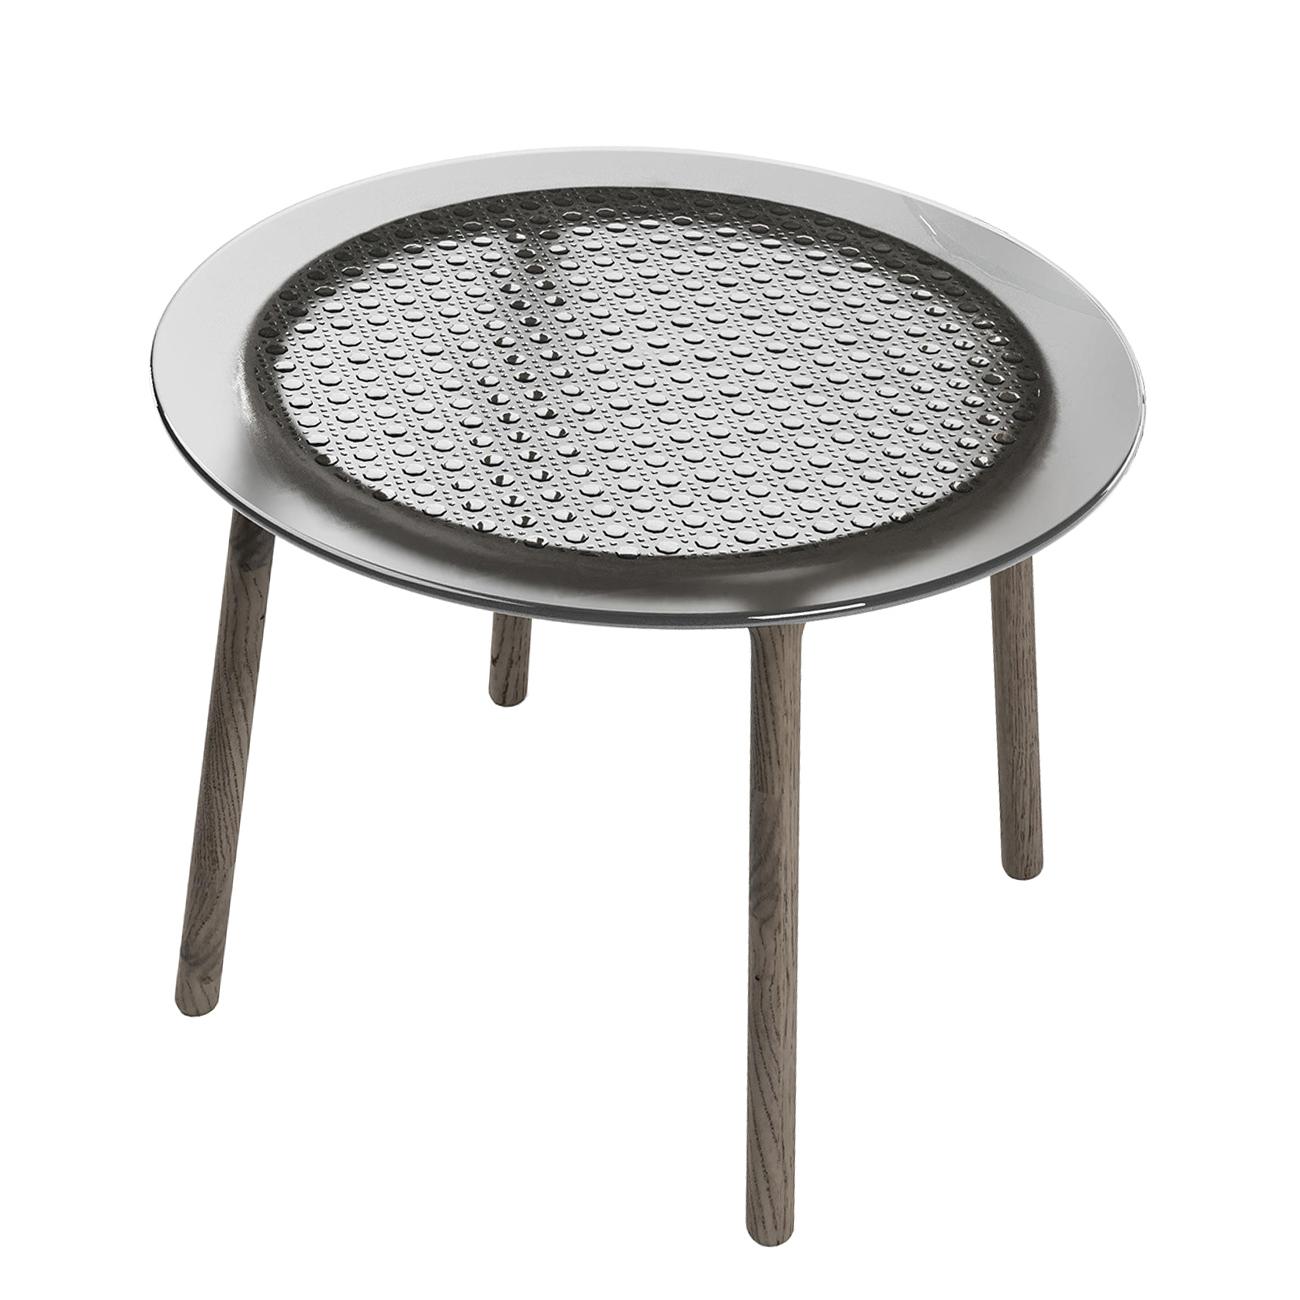 SIde Table Cane Glass Smoke with base structure in solid
oak in stained coffee finish, with tempered fused glass top,
10 mm thickness, smoke grey glass top with cane pattern.
Also available with glass top in amber finish or clear finish.